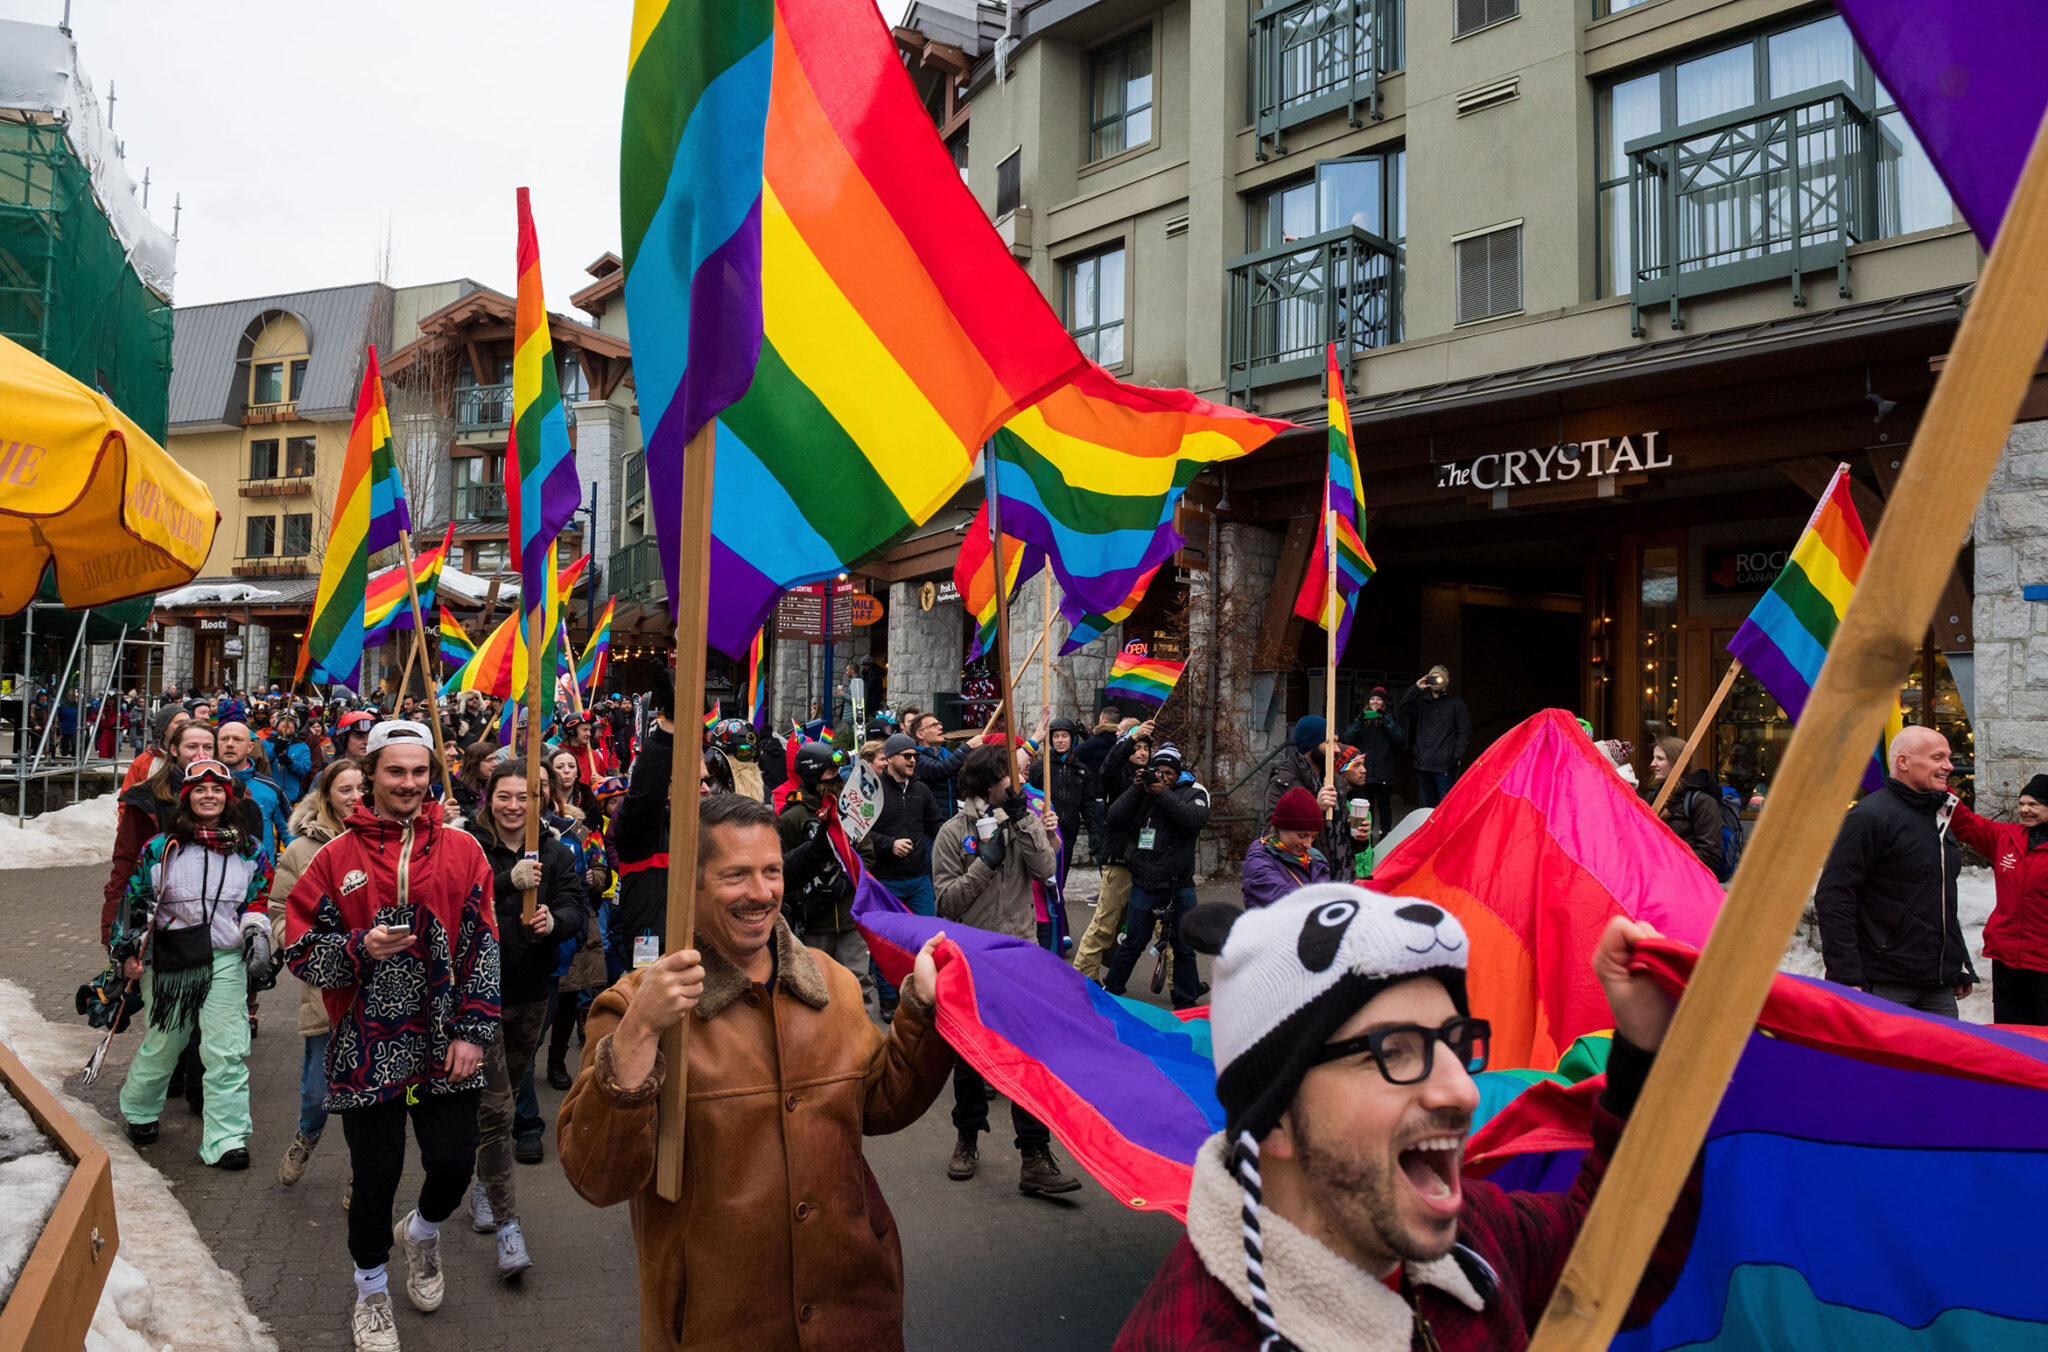 The Whistler Pride and Ski Festival parade makes its way through Whistler Village to Olympic Plaza. People are carrying rainbow flags and banners.